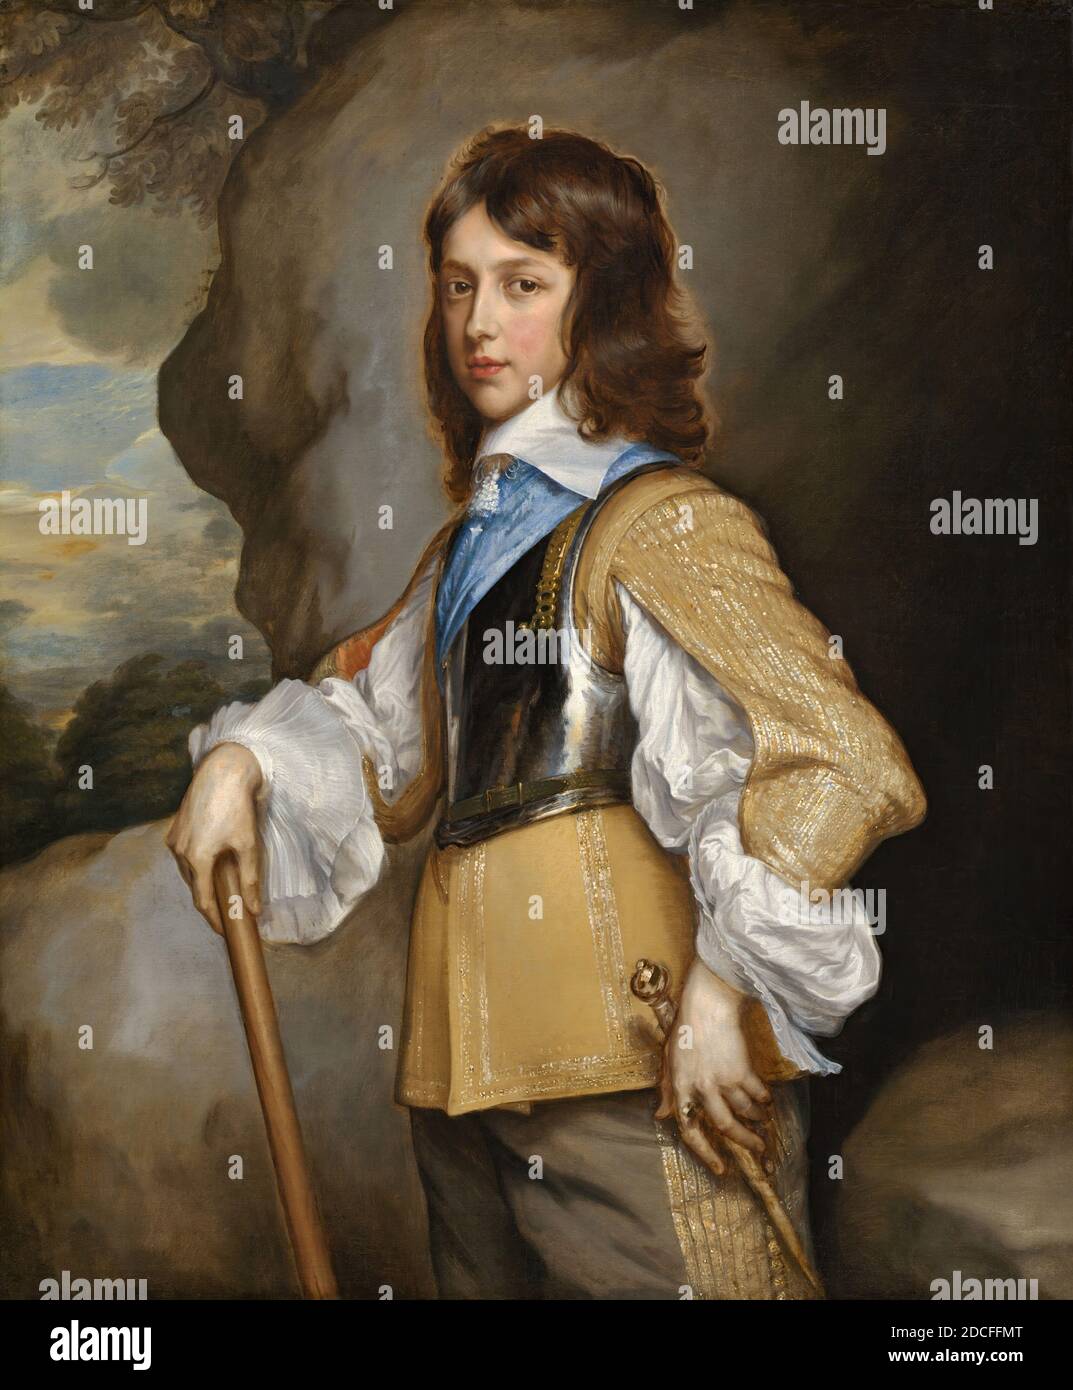 Adriaen Hanneman, (painter), Dutch, c. 1603/1604 - 1671, Henry, Duke of Gloucester, c. 1653, oil on canvas, overall: 104.8 x 87 cm (41 1/4 x 34 1/4 in.), framed: 128.91 x 111.13 x 11.43 cm (50 3/4 x 43 3/4 x 4 1/2 in.), In this three-quarter-length portrait, Henry, Duke of Gloucester, confidently counters the viewer’s scrutiny. He wears a gleaming breastplate that covers a richly brocaded gold doublet with split sleeves; his right hand rests on a staff while his left hand covers the hilt of a gold-topped rapier Stock Photo